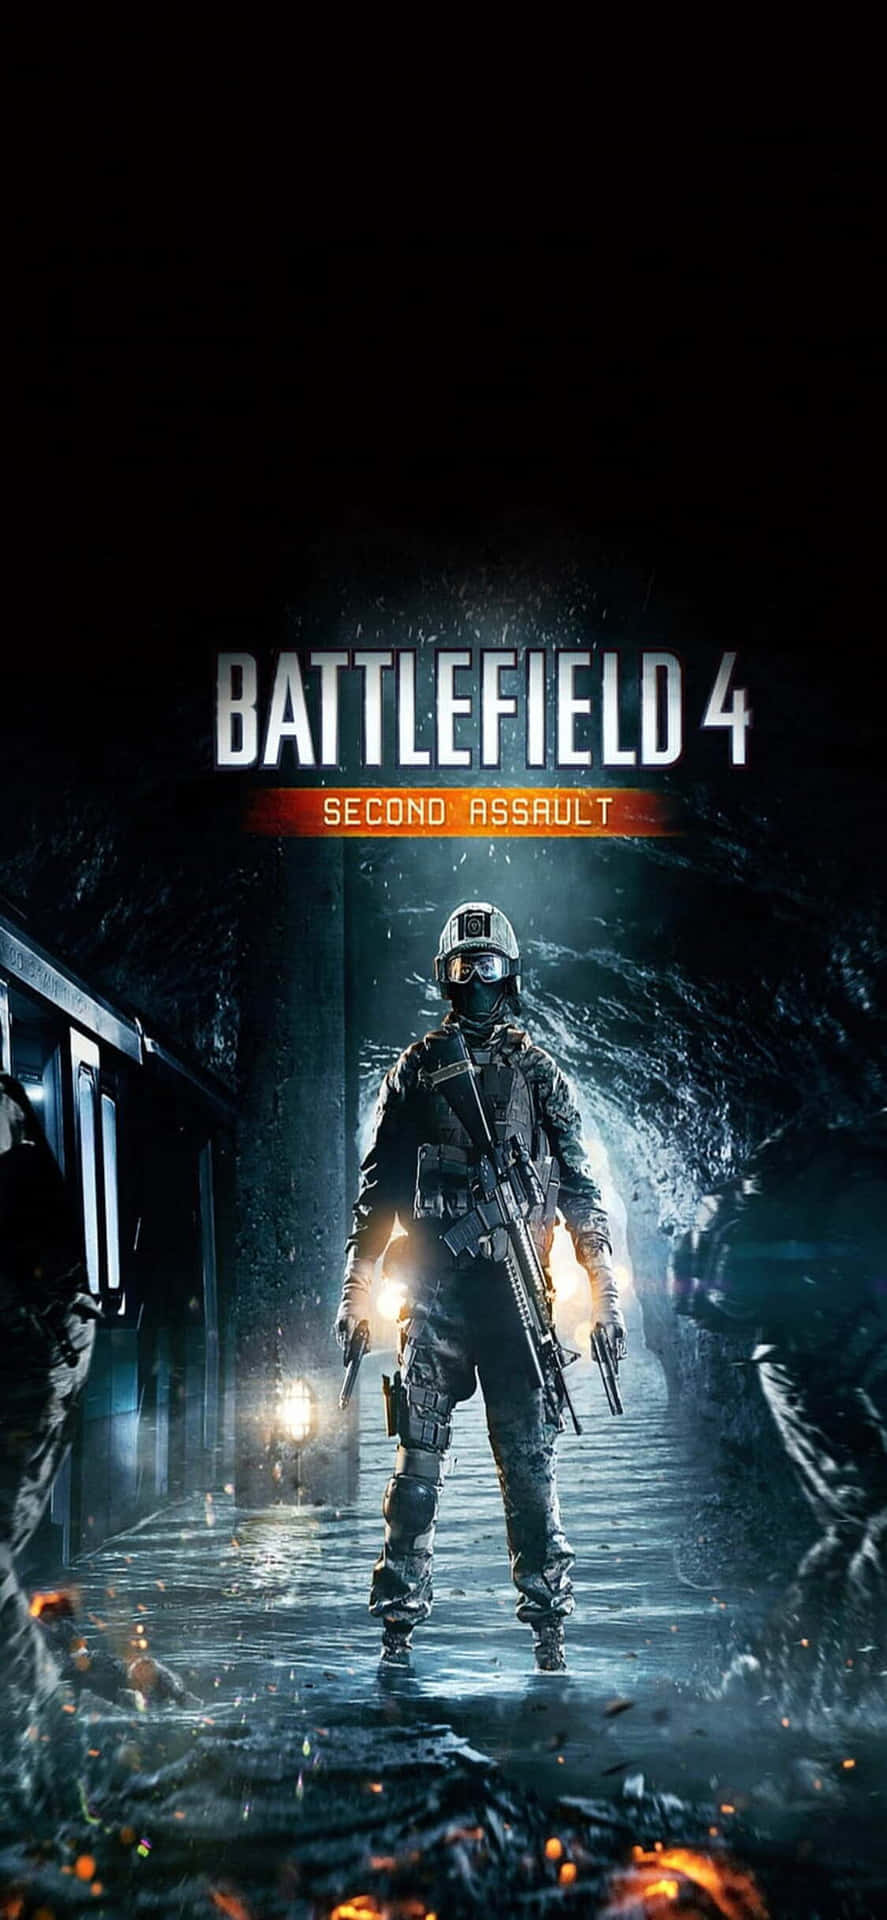 Intense battlefield action awaits with iPhone X and Battlefield 4